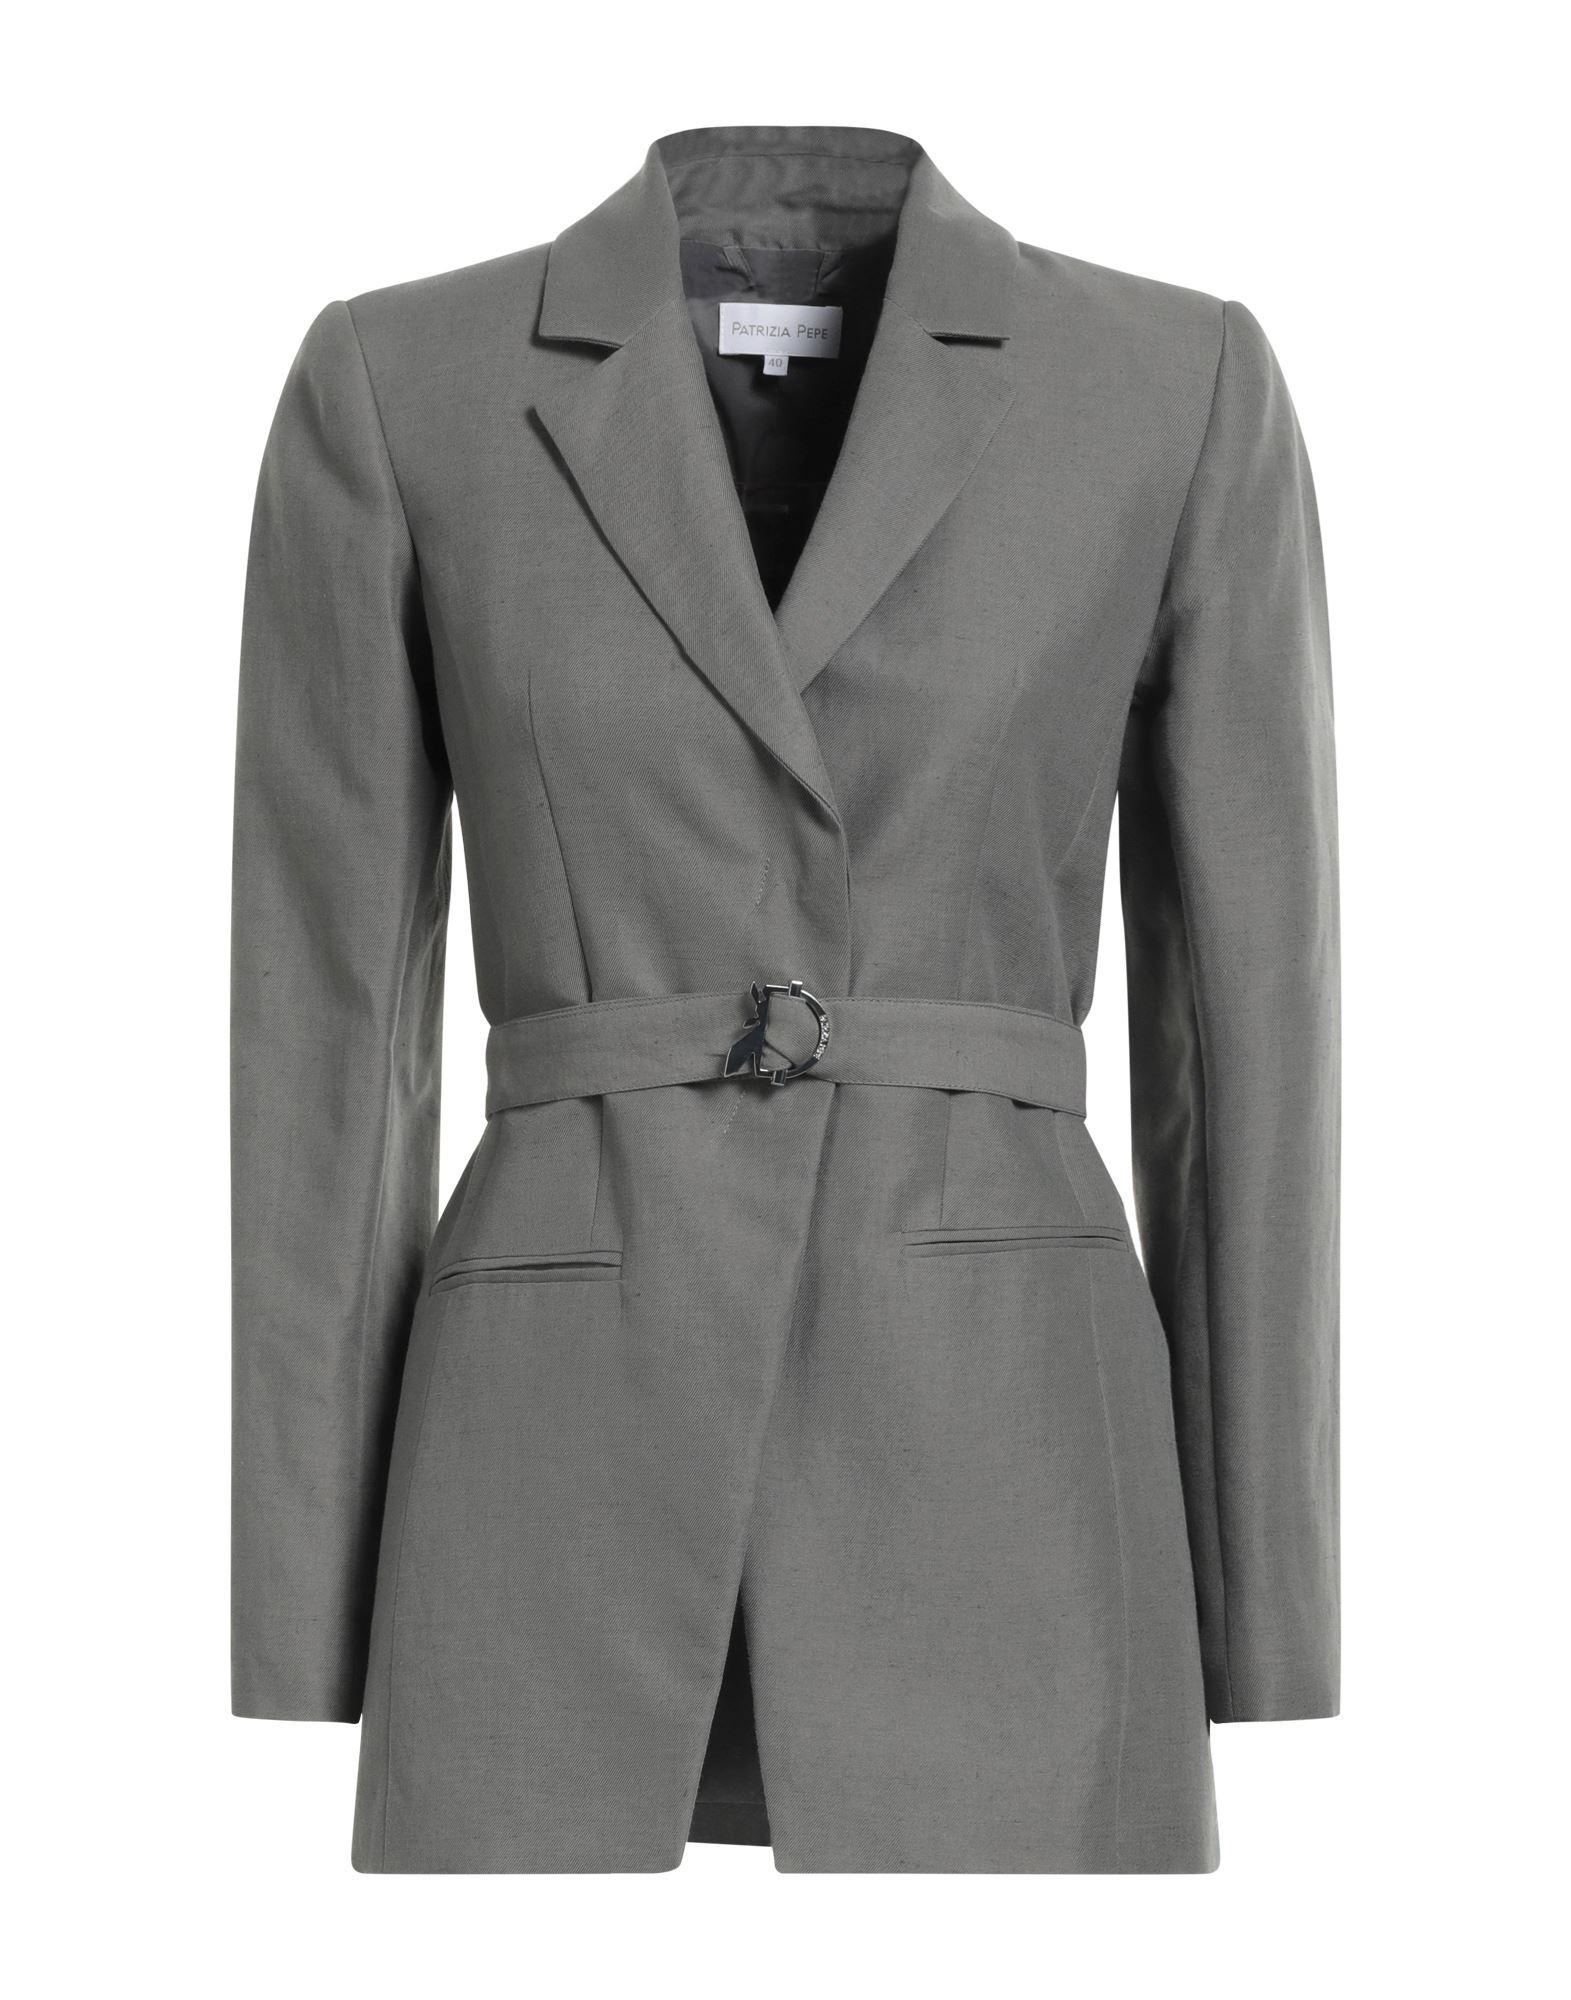 Patrizia Pepe Suit Jacket in Gray | Lyst